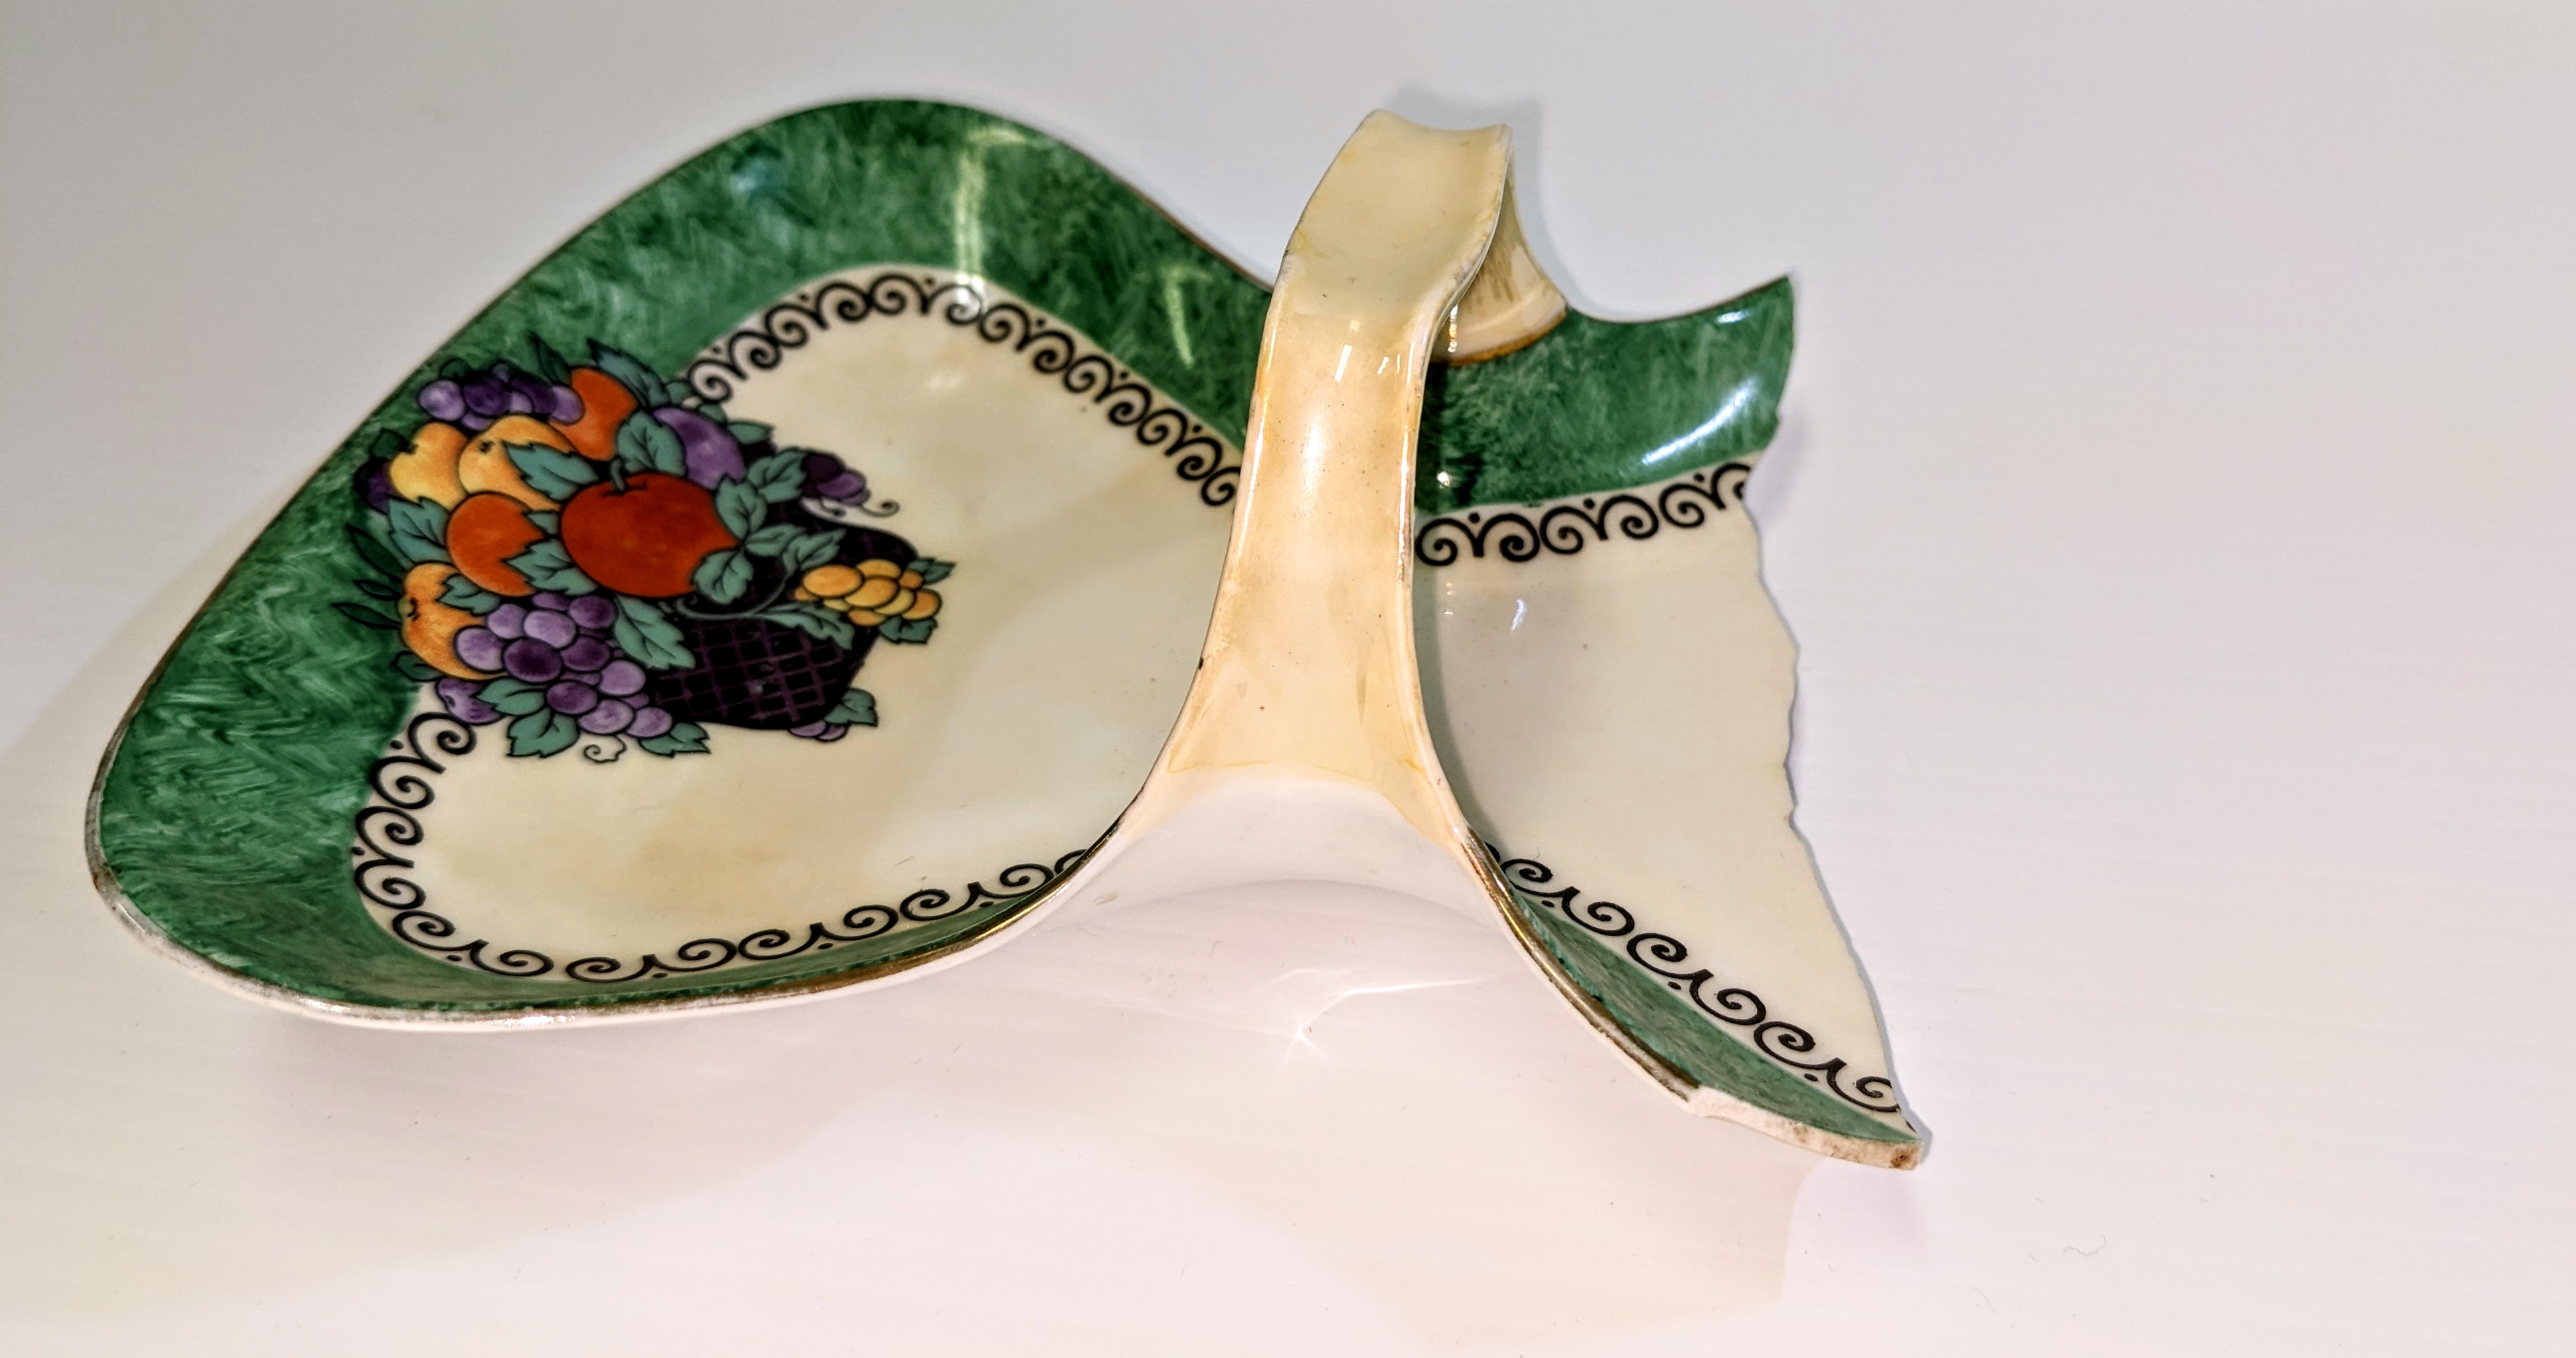 This is a candy dish (well 3/4 of it any way) that was found in the Rose house at Prairie Point. Charles and Hilda Rose moved to Prairie Point from Idaho in 1926 where they lived in a tent until mid November when Sheridan Lawrence and a crew of 4 men built them a cabin in 6 days. This dish is hand painted with hints of Art Deco style and is made by Royal Silesia - a German company that produced china from 1920-1940.
2002.253.12.39 / Toews, Al + Marilee
31/10/2022